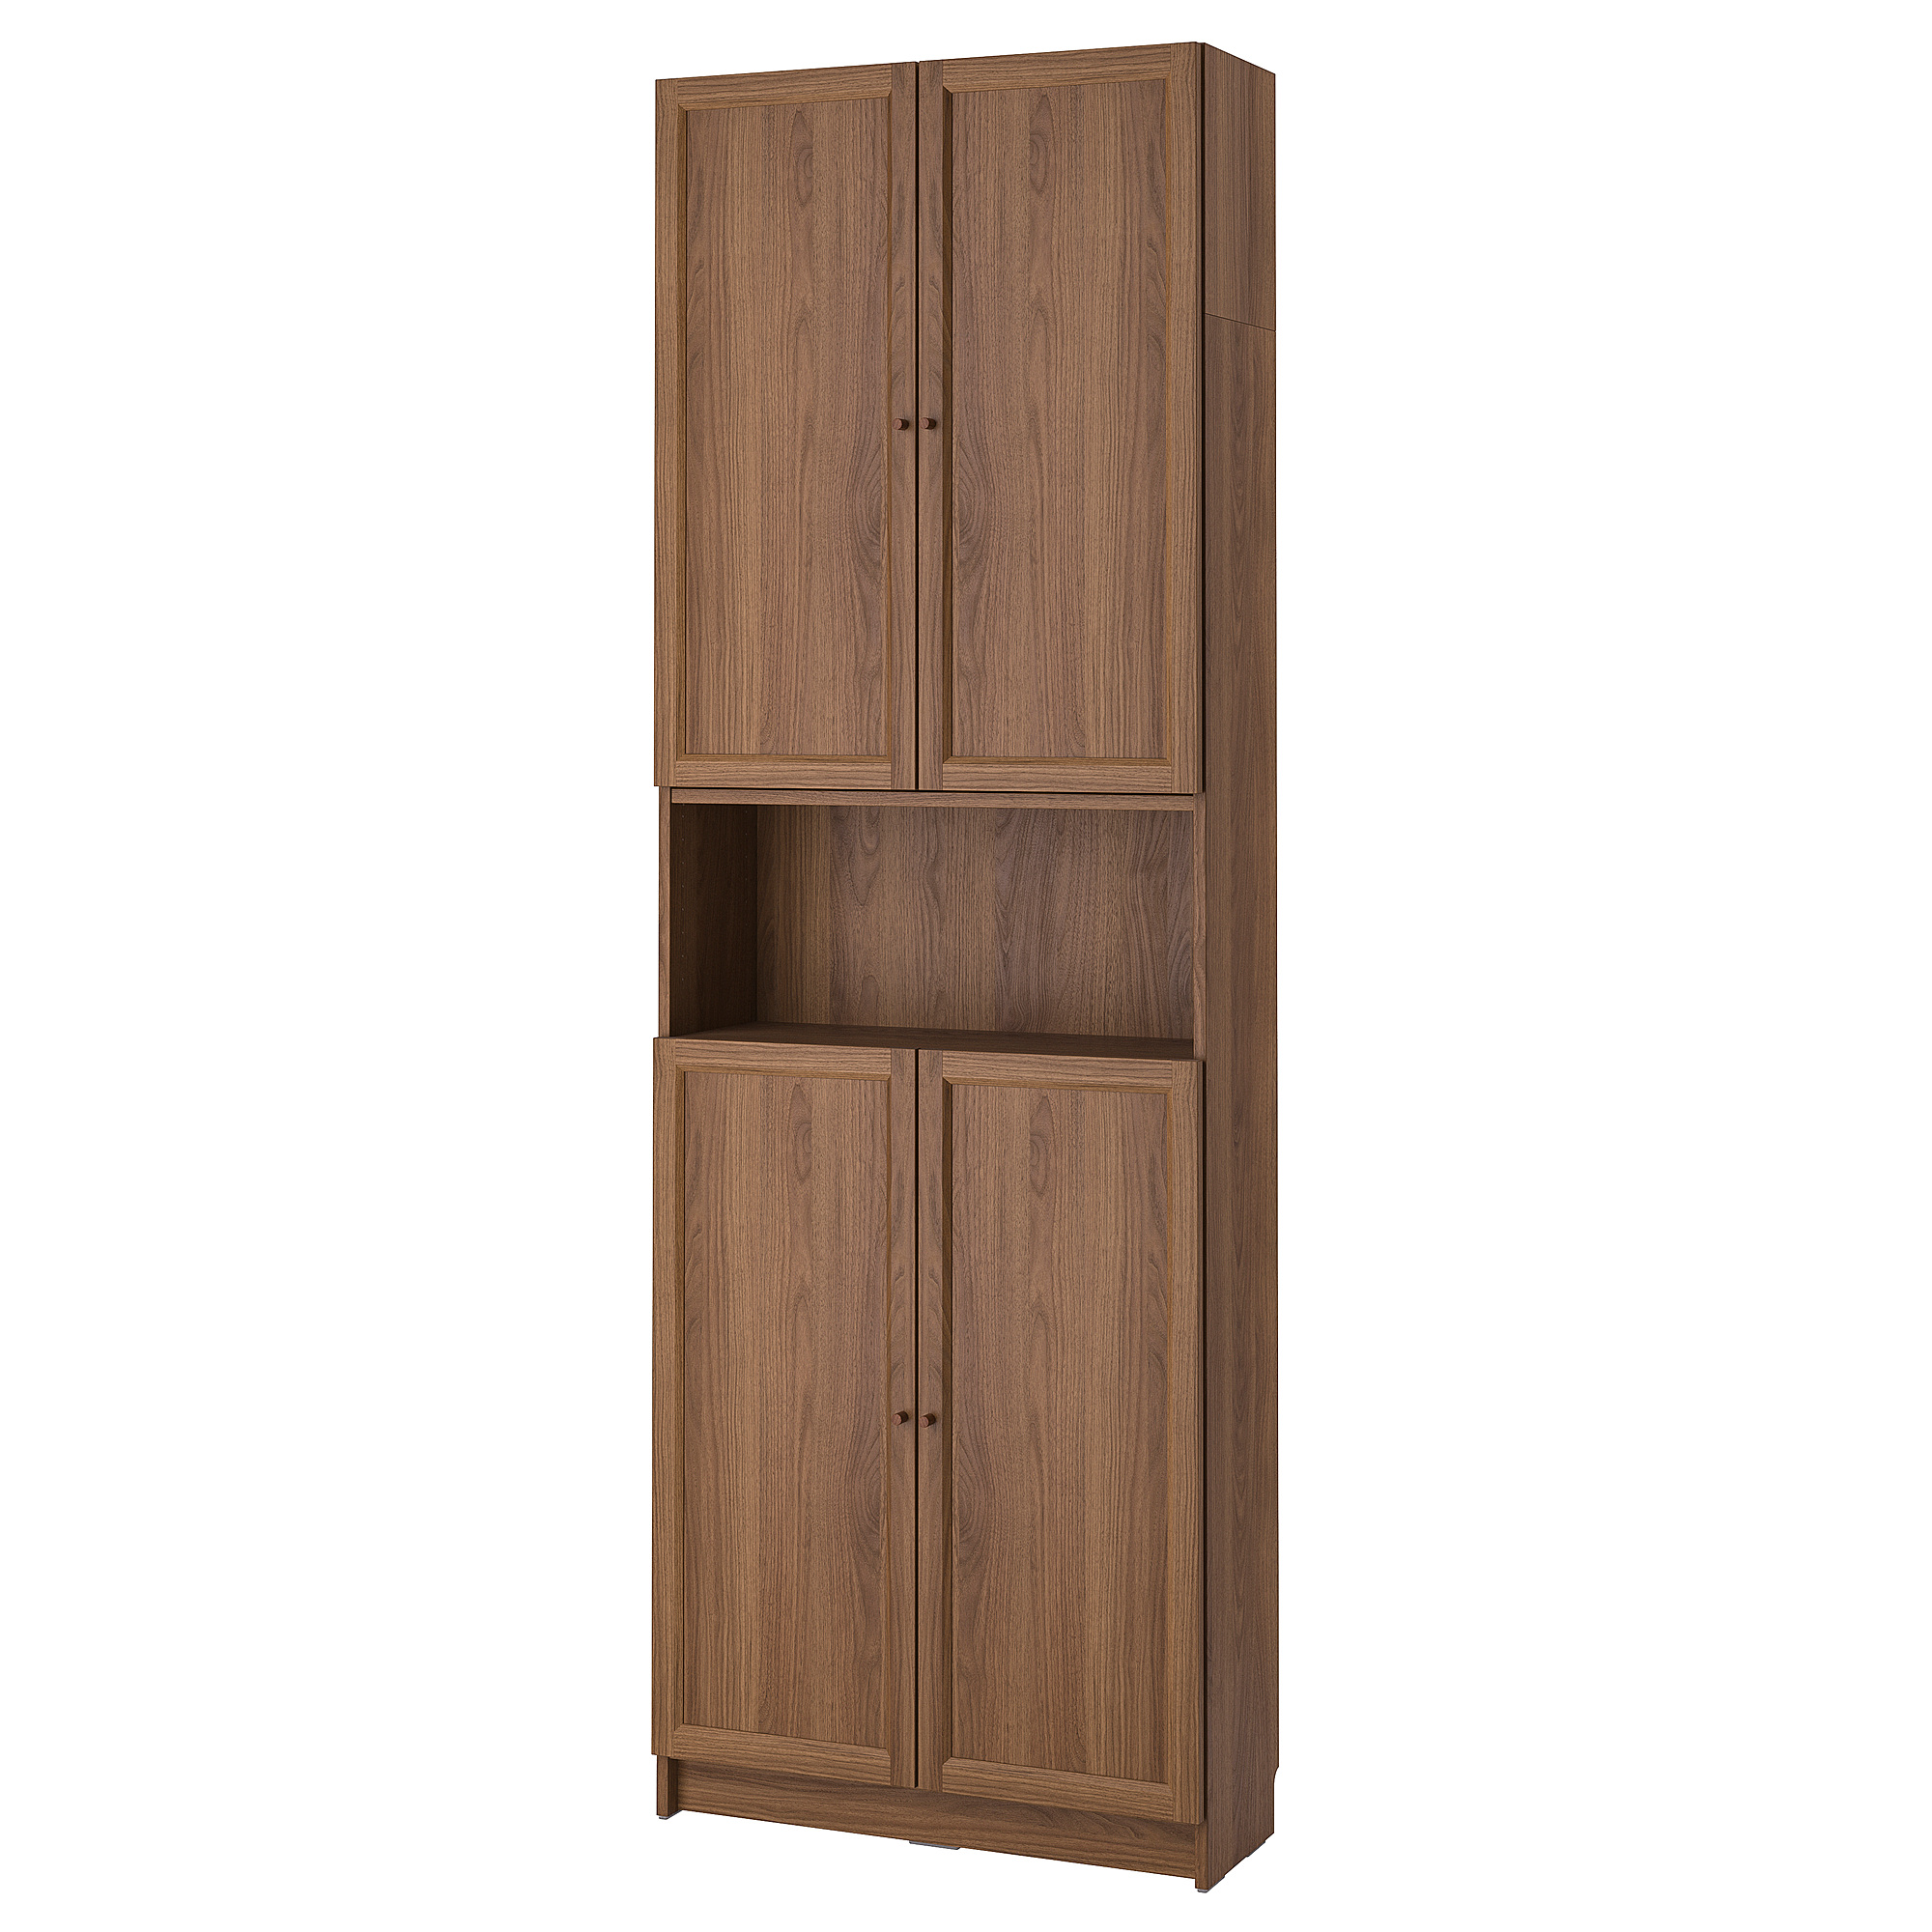 BILLY/OXBERG bookcase w doors/extension unit